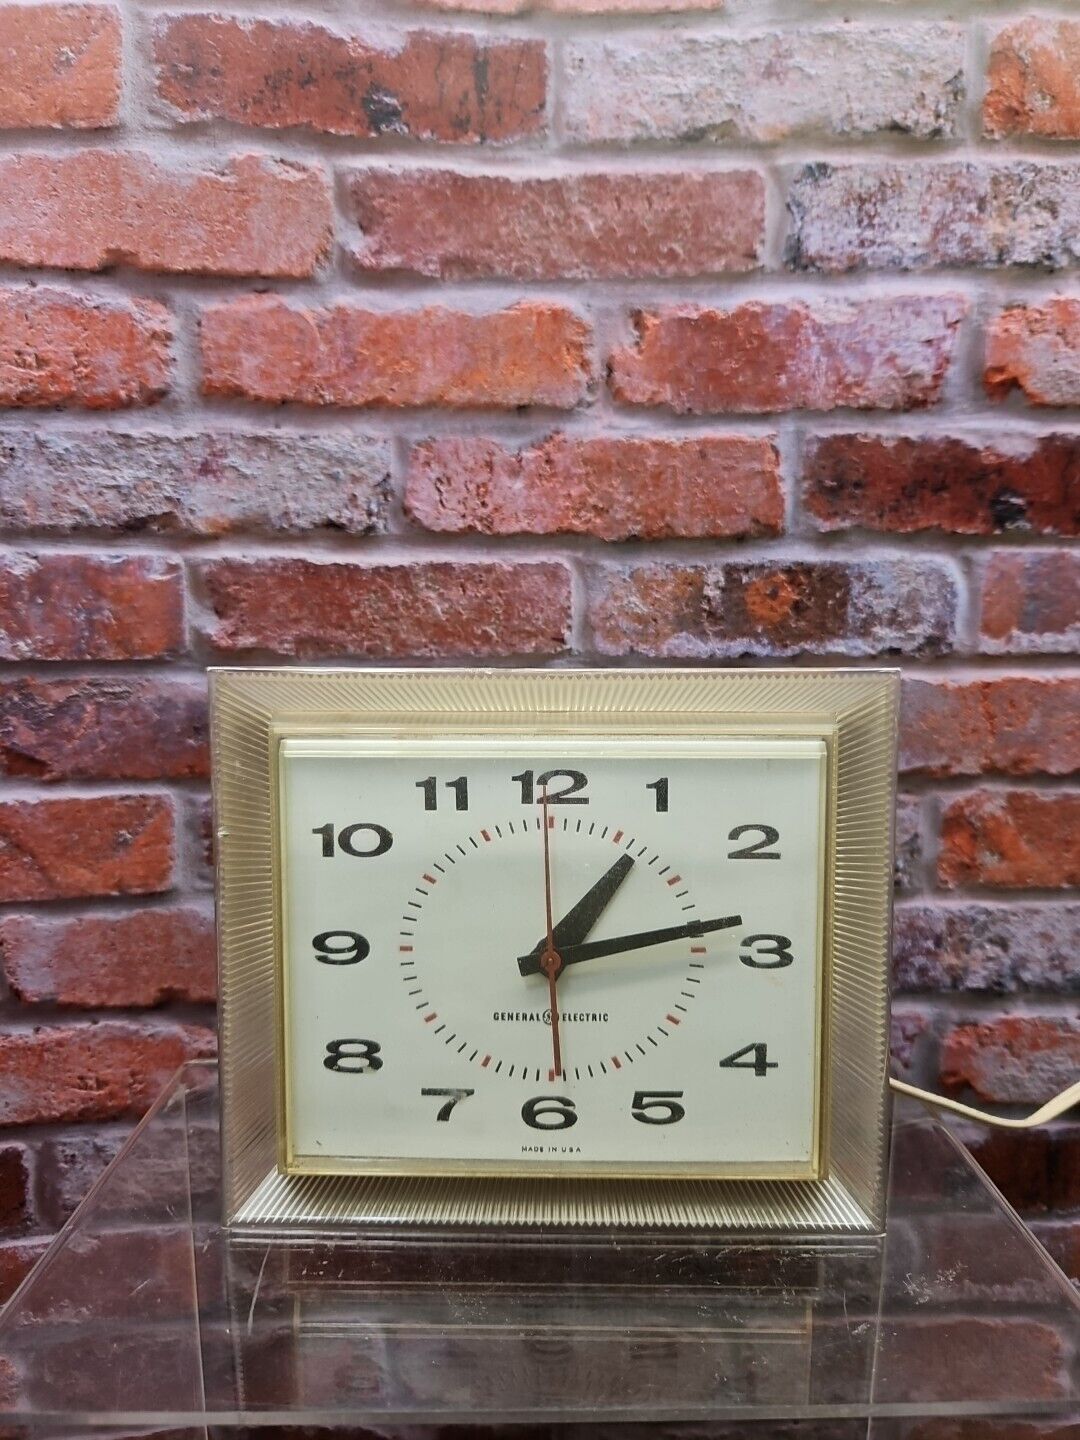 Vintage General Electric working clock model 2136 mid century, modern USA made